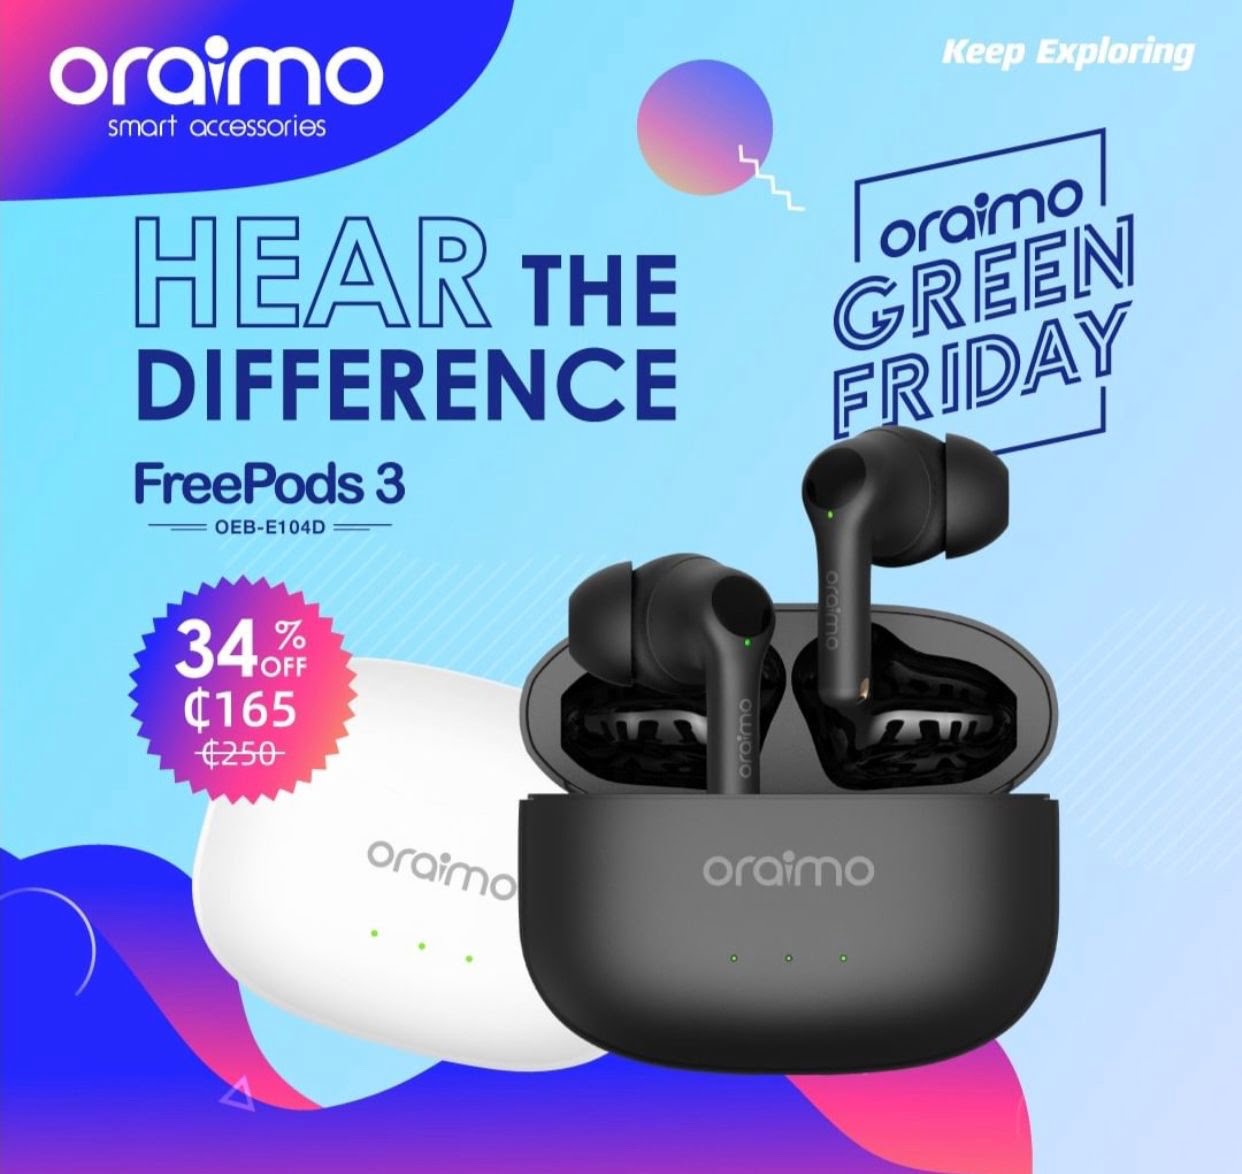 Experience the new oraimo FreePods 3 and enjoy true sound in Ghana